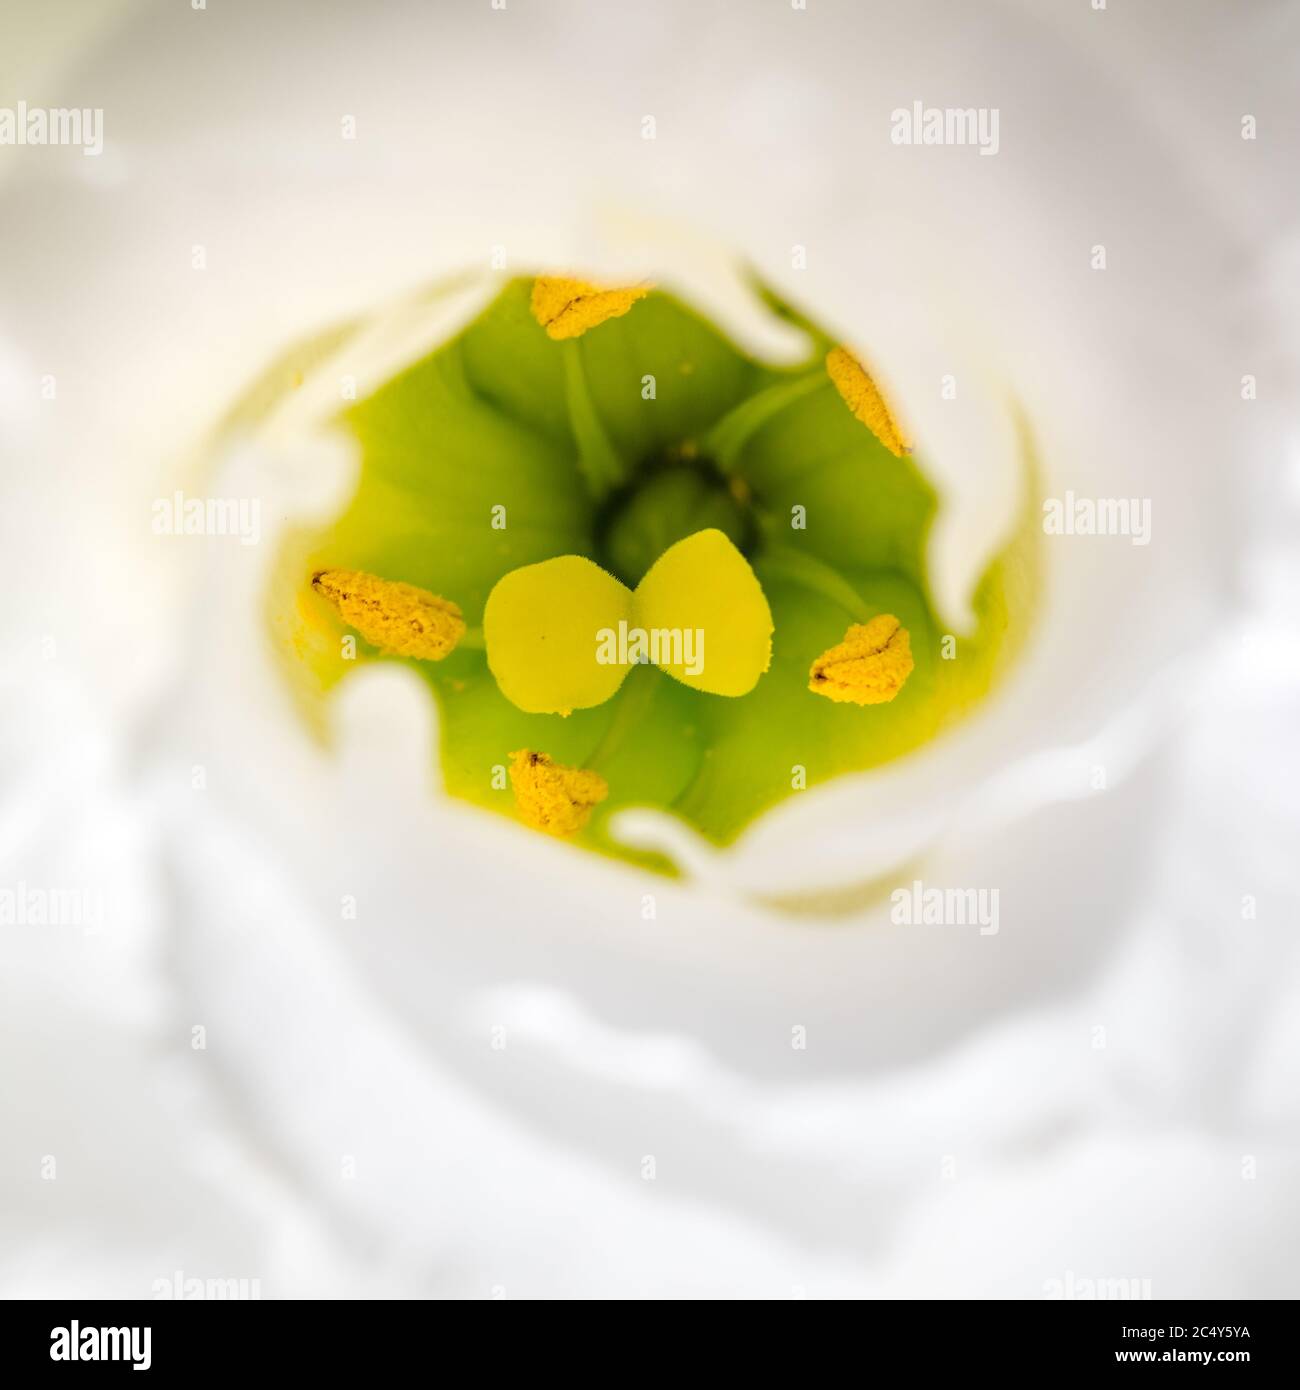 Inside the flower, pistils and stamens. Stock Photo